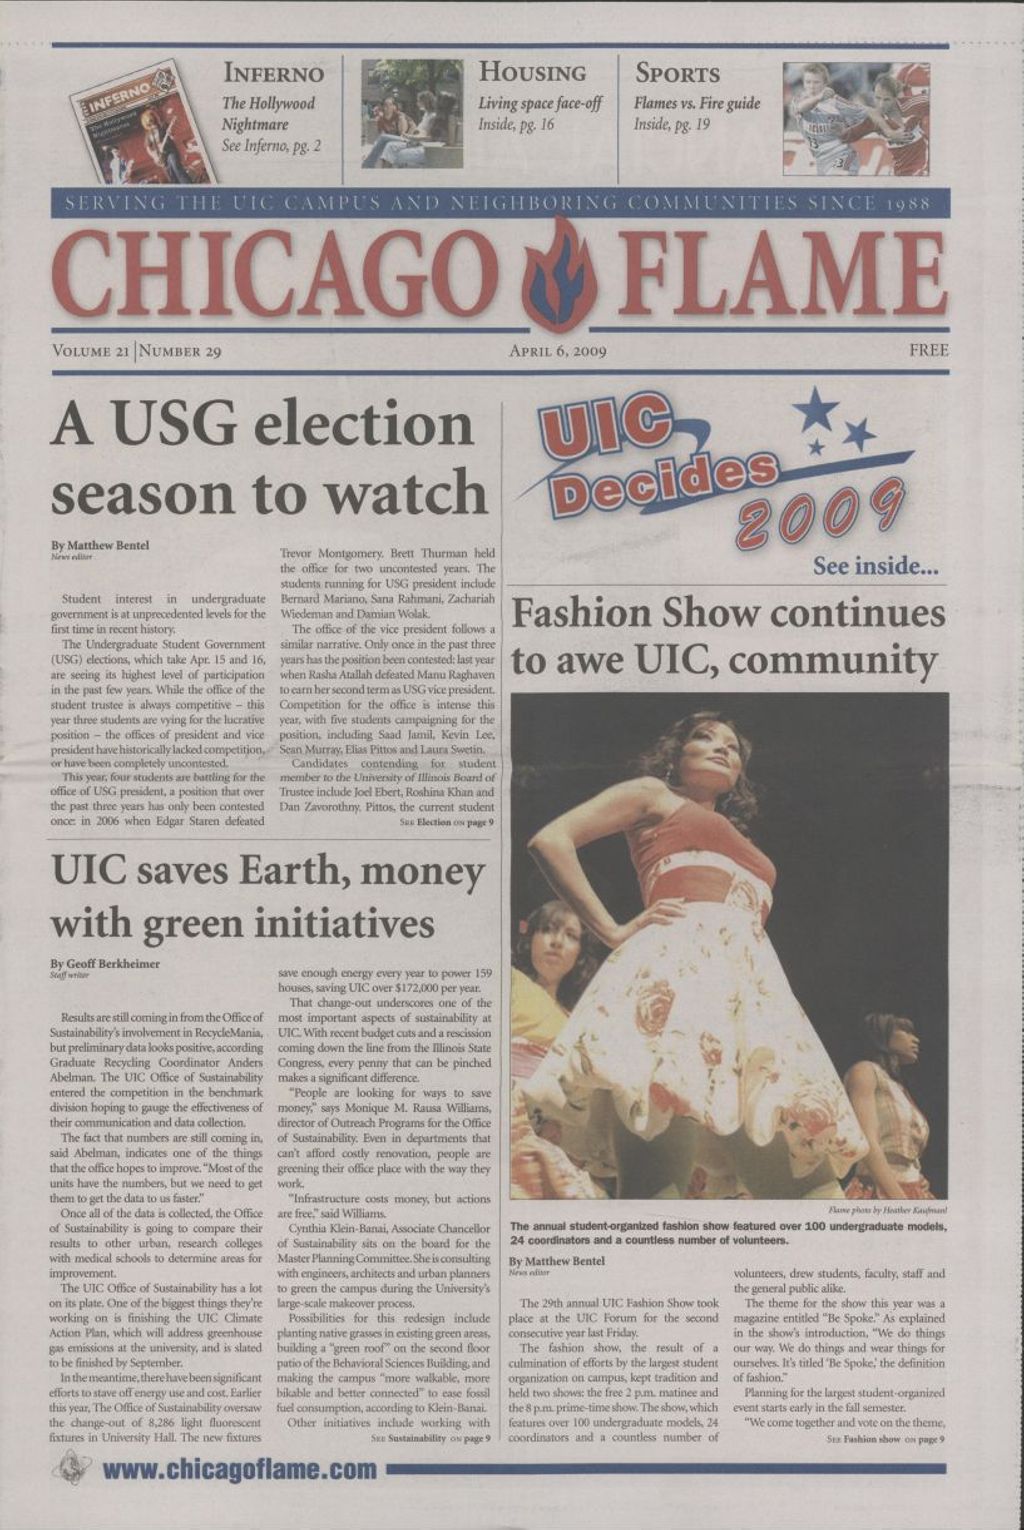 Miniature of Chicago Flame (April 6, 2009)